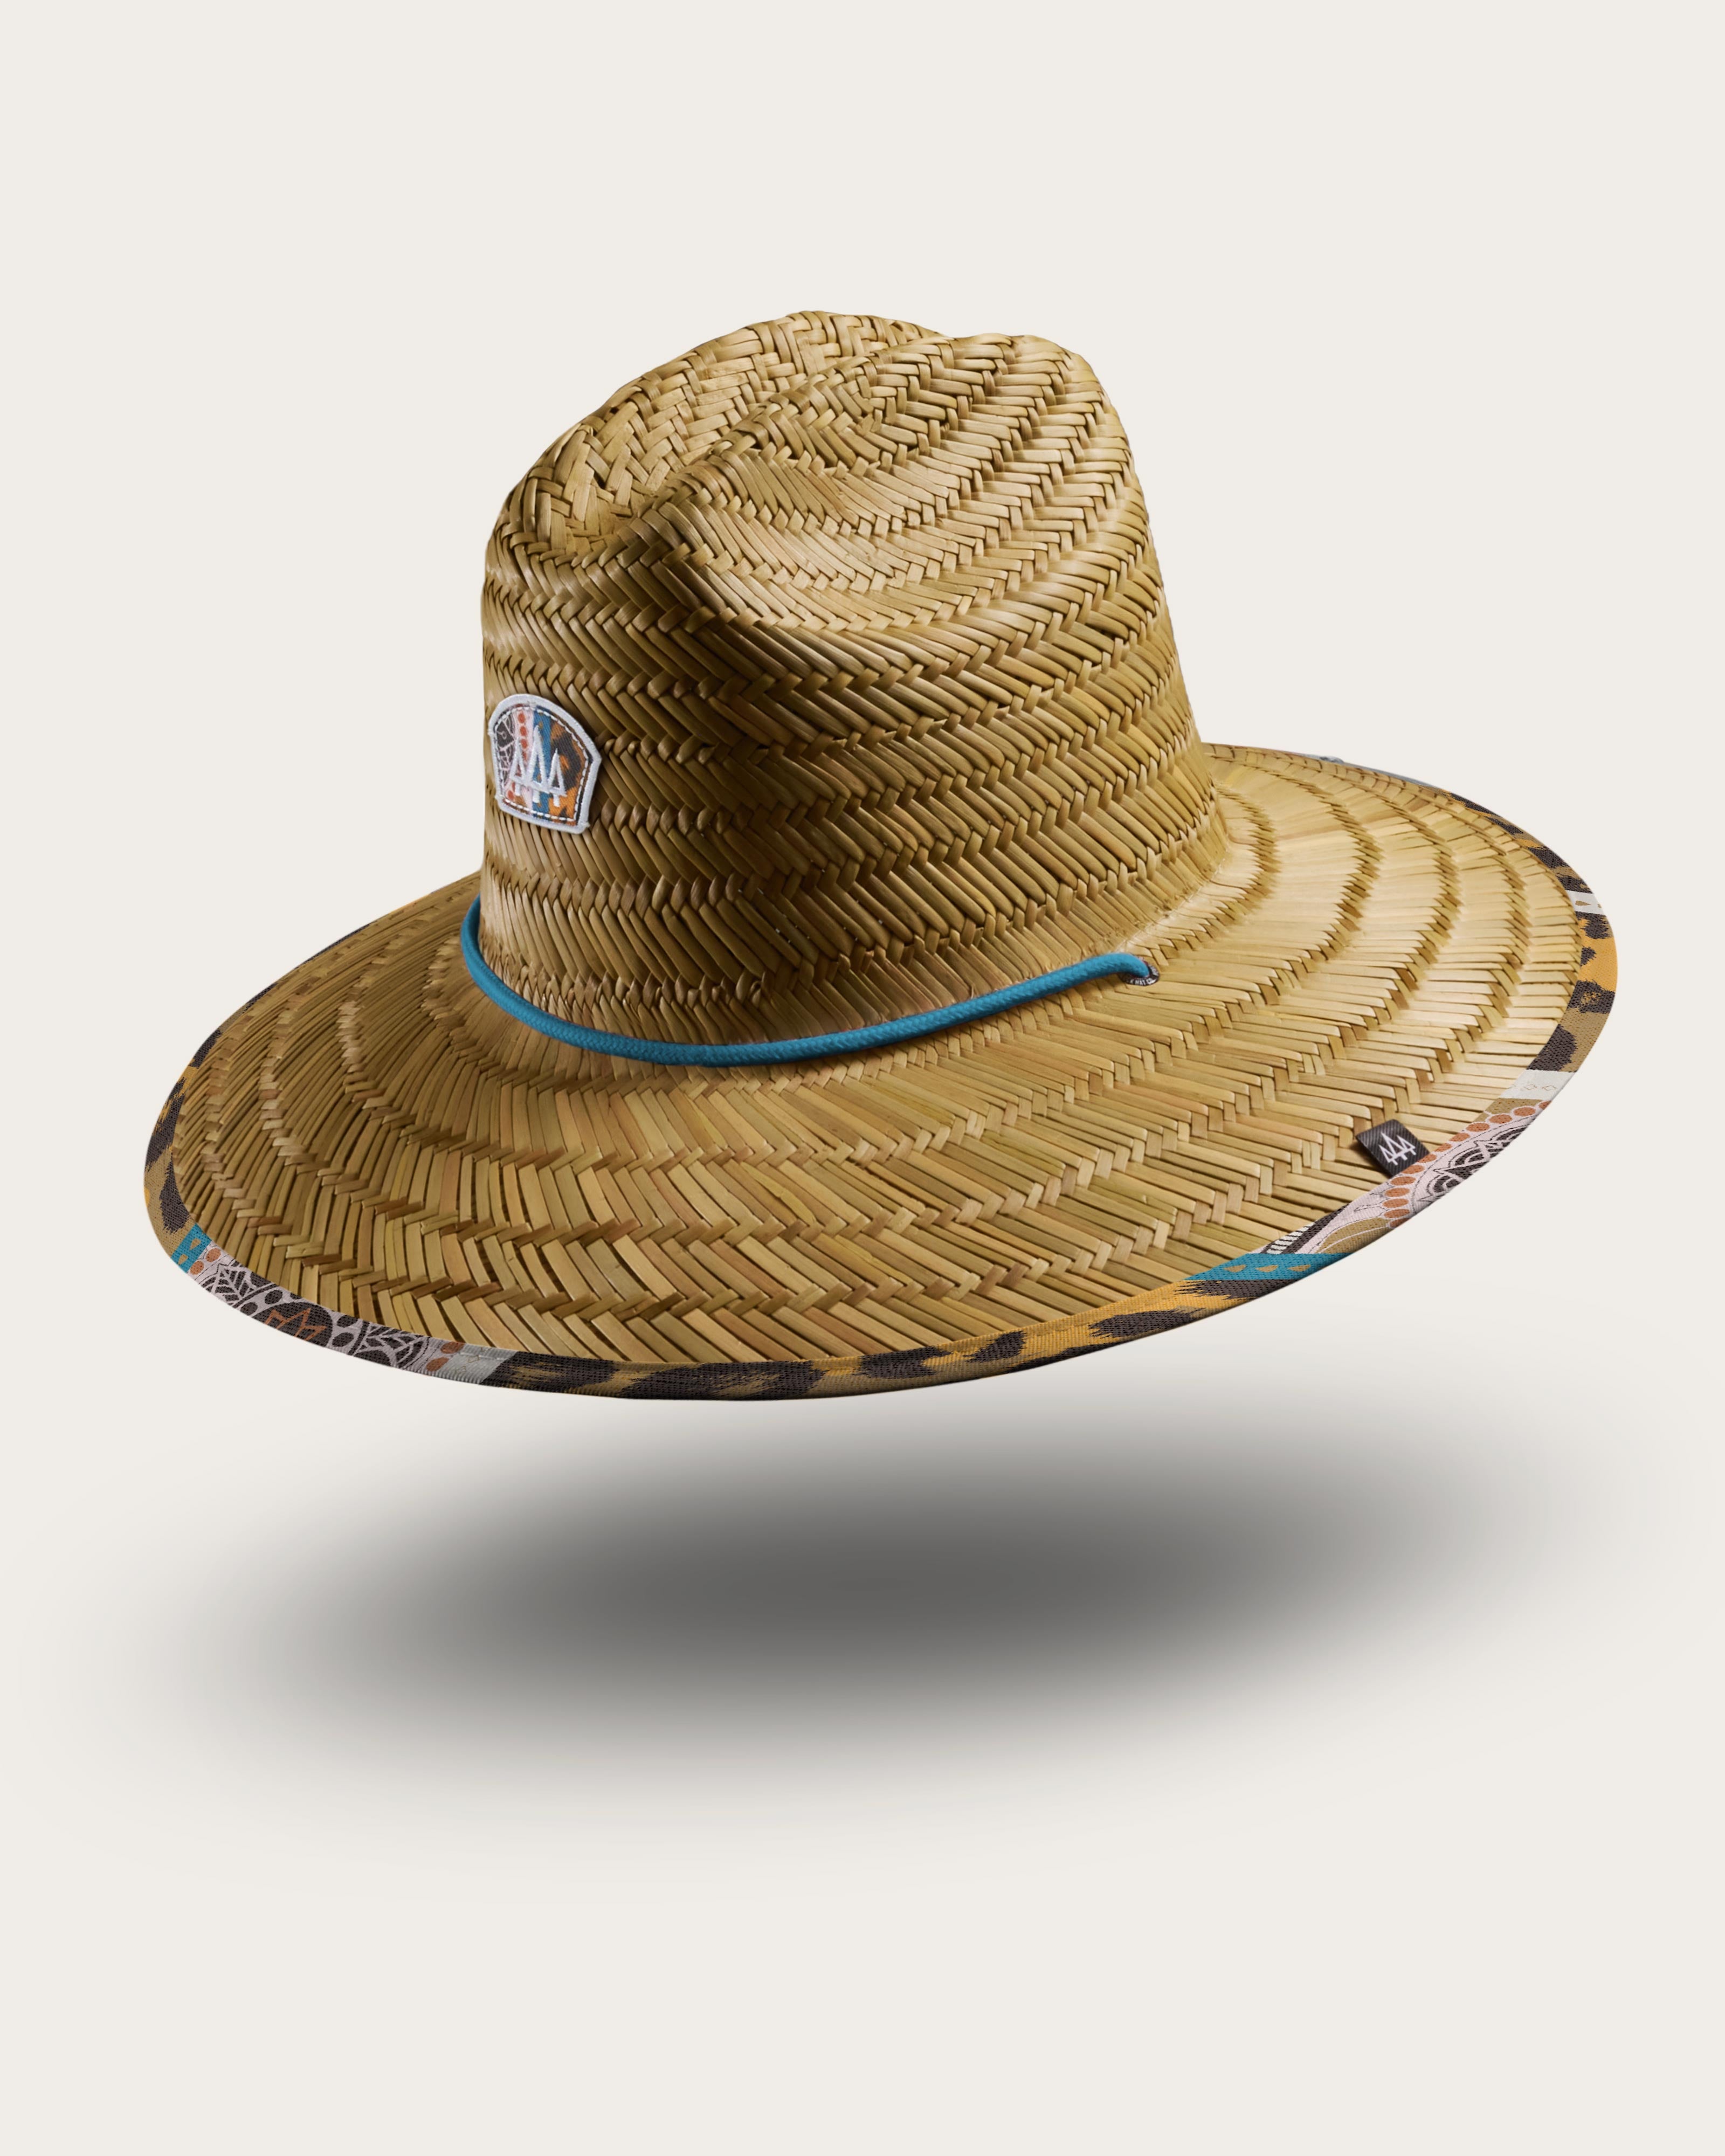 Hemlock Bazaar straw lifeguard hat with cheetah mosaic pattern with patch